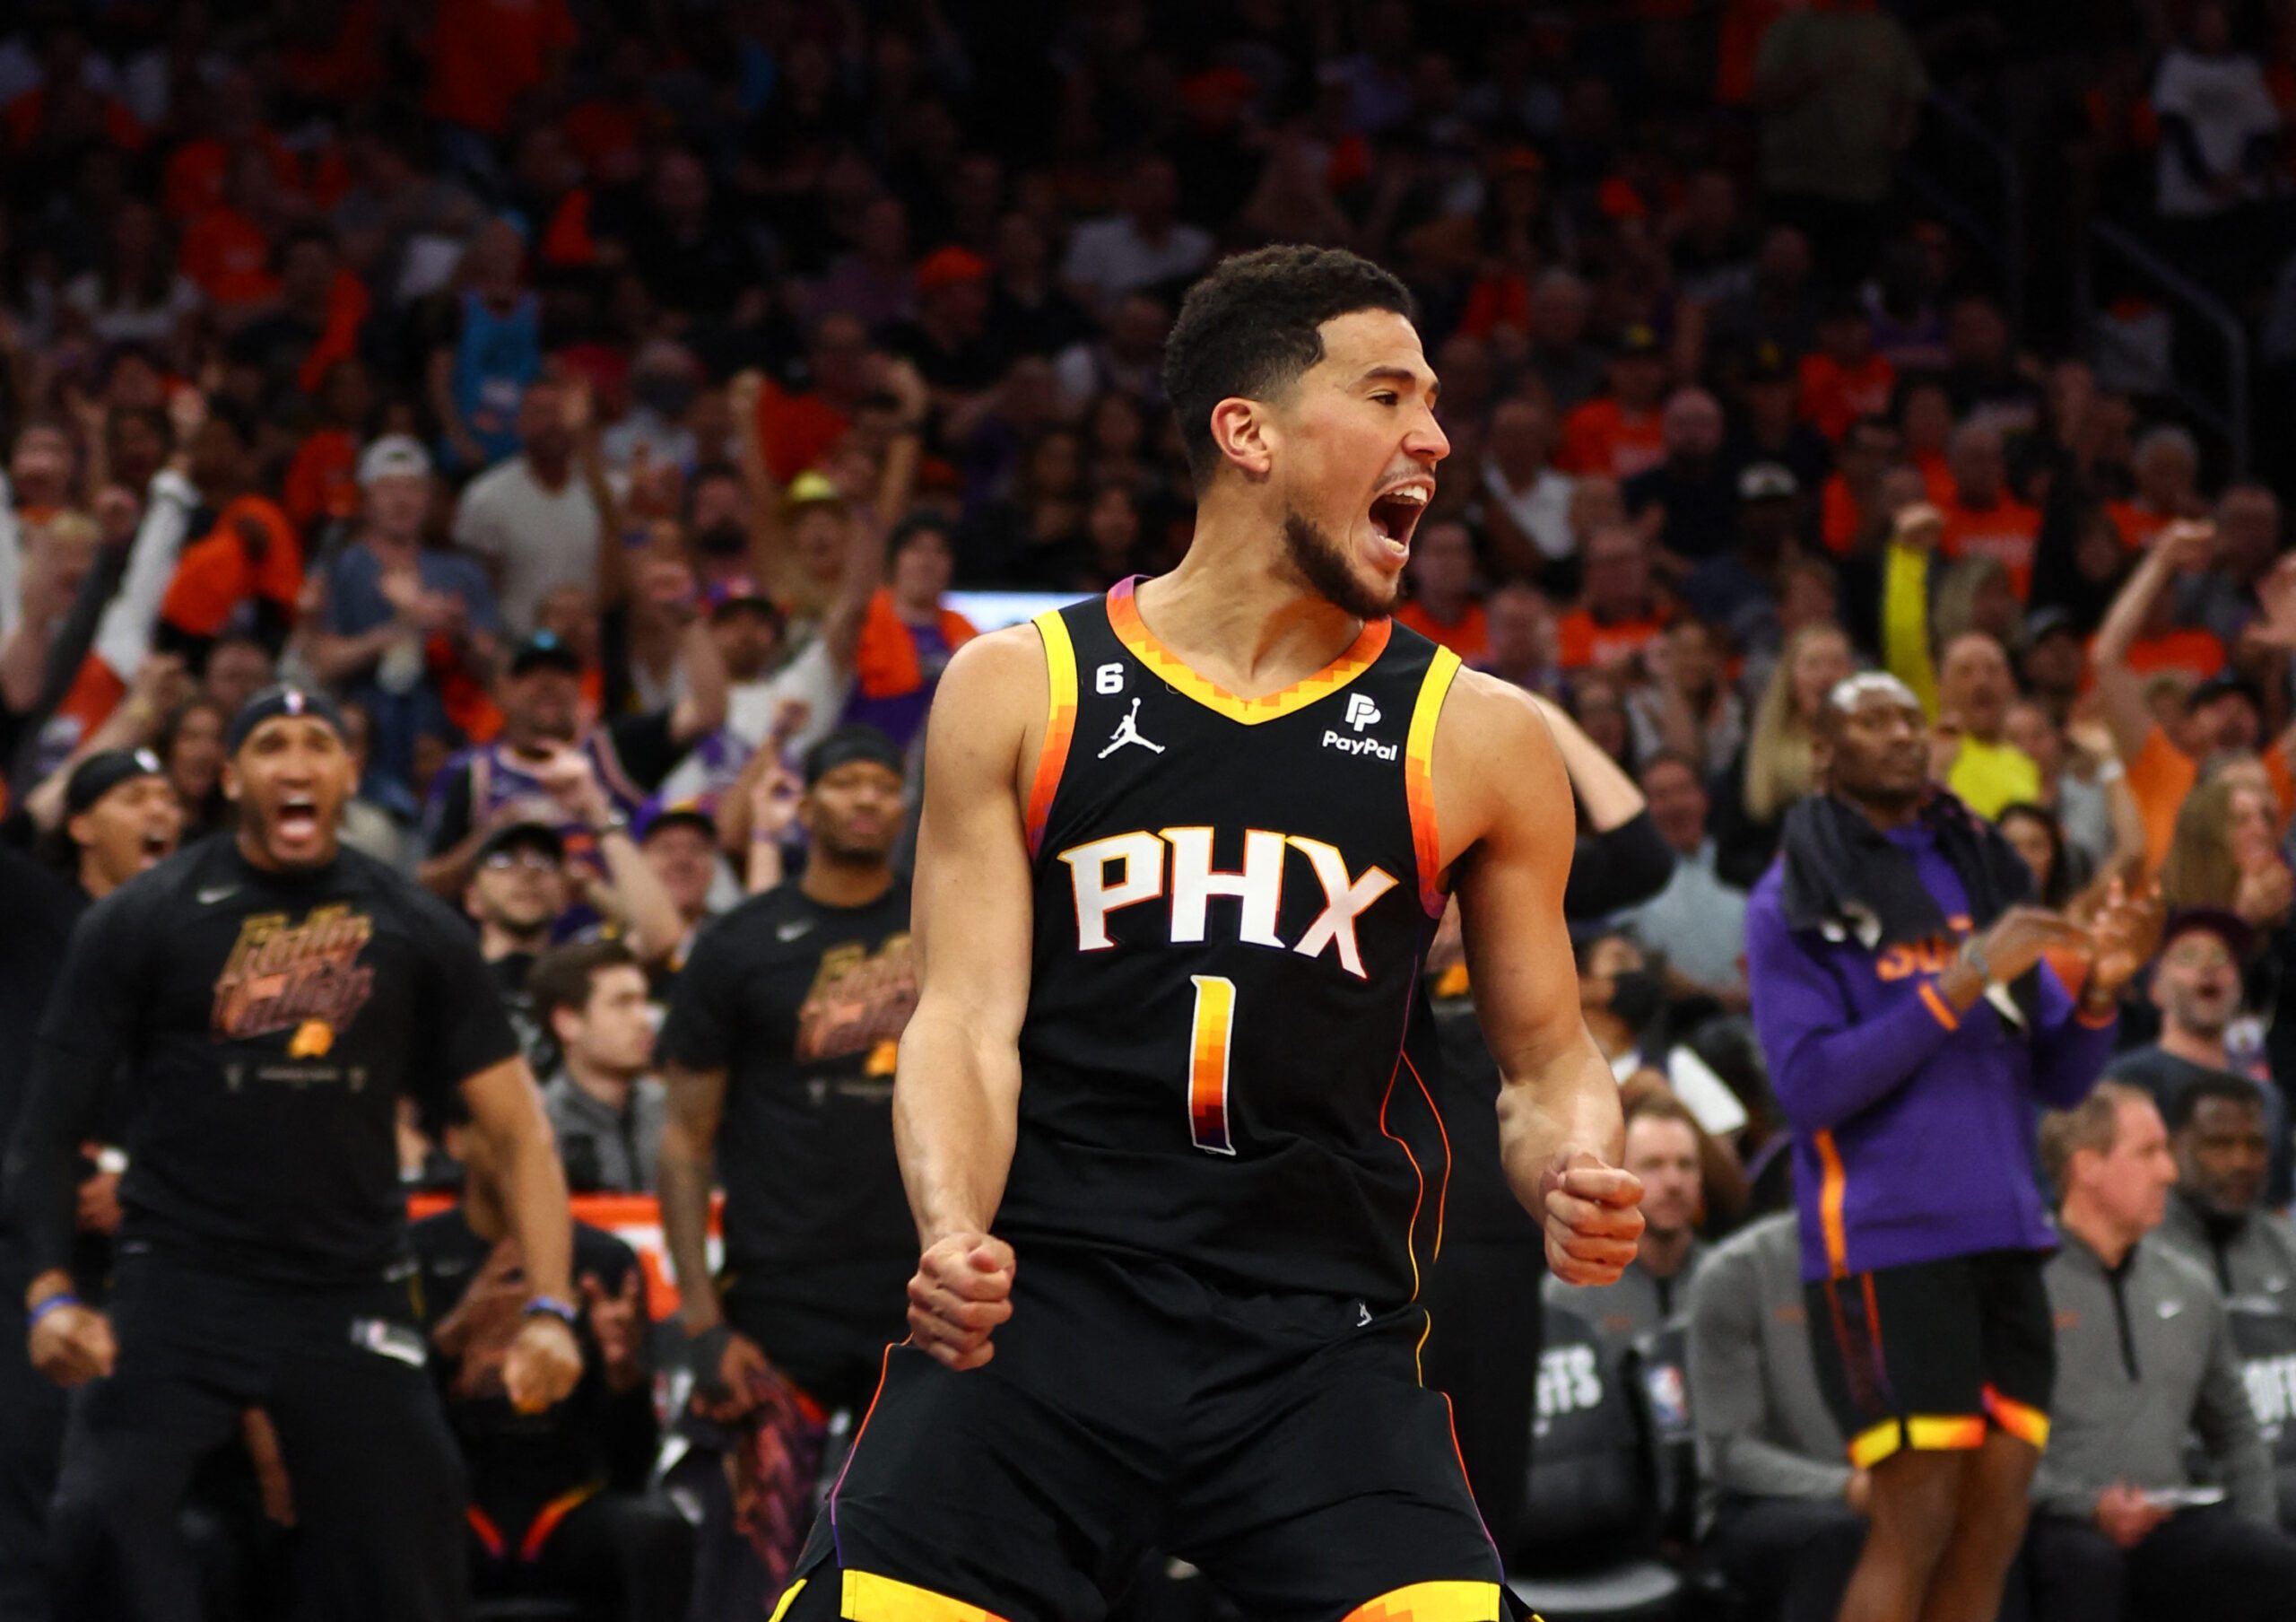 Devin Booker pours in 47 as Suns oust Clippers